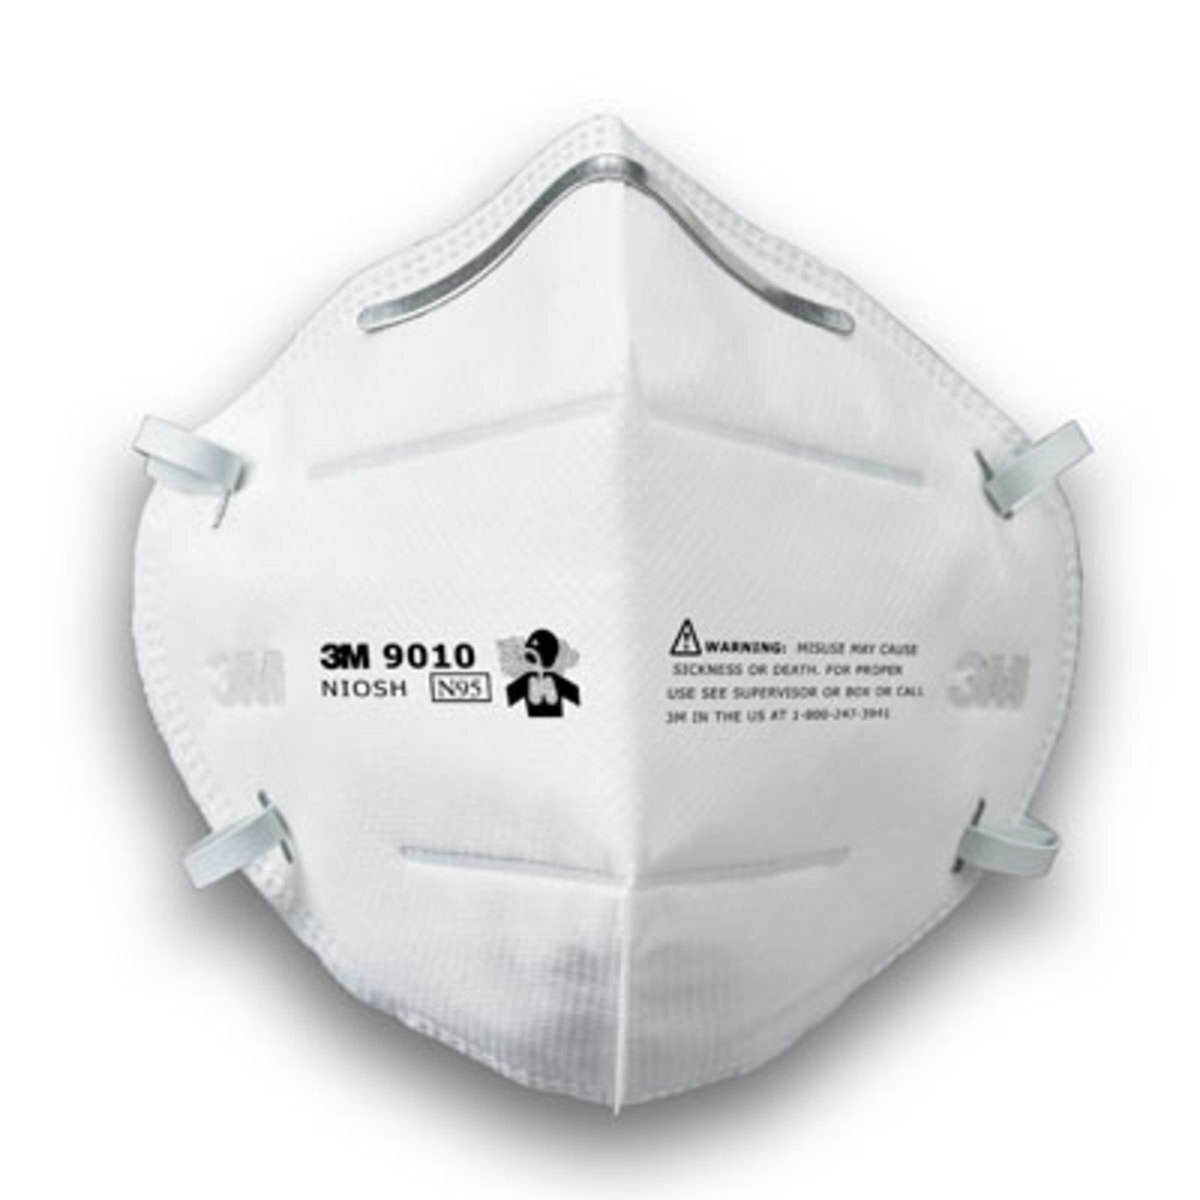 3M™ N95 Particulate Respirator 9010 (50 Per Box) (Limited quantities available while supplies last)